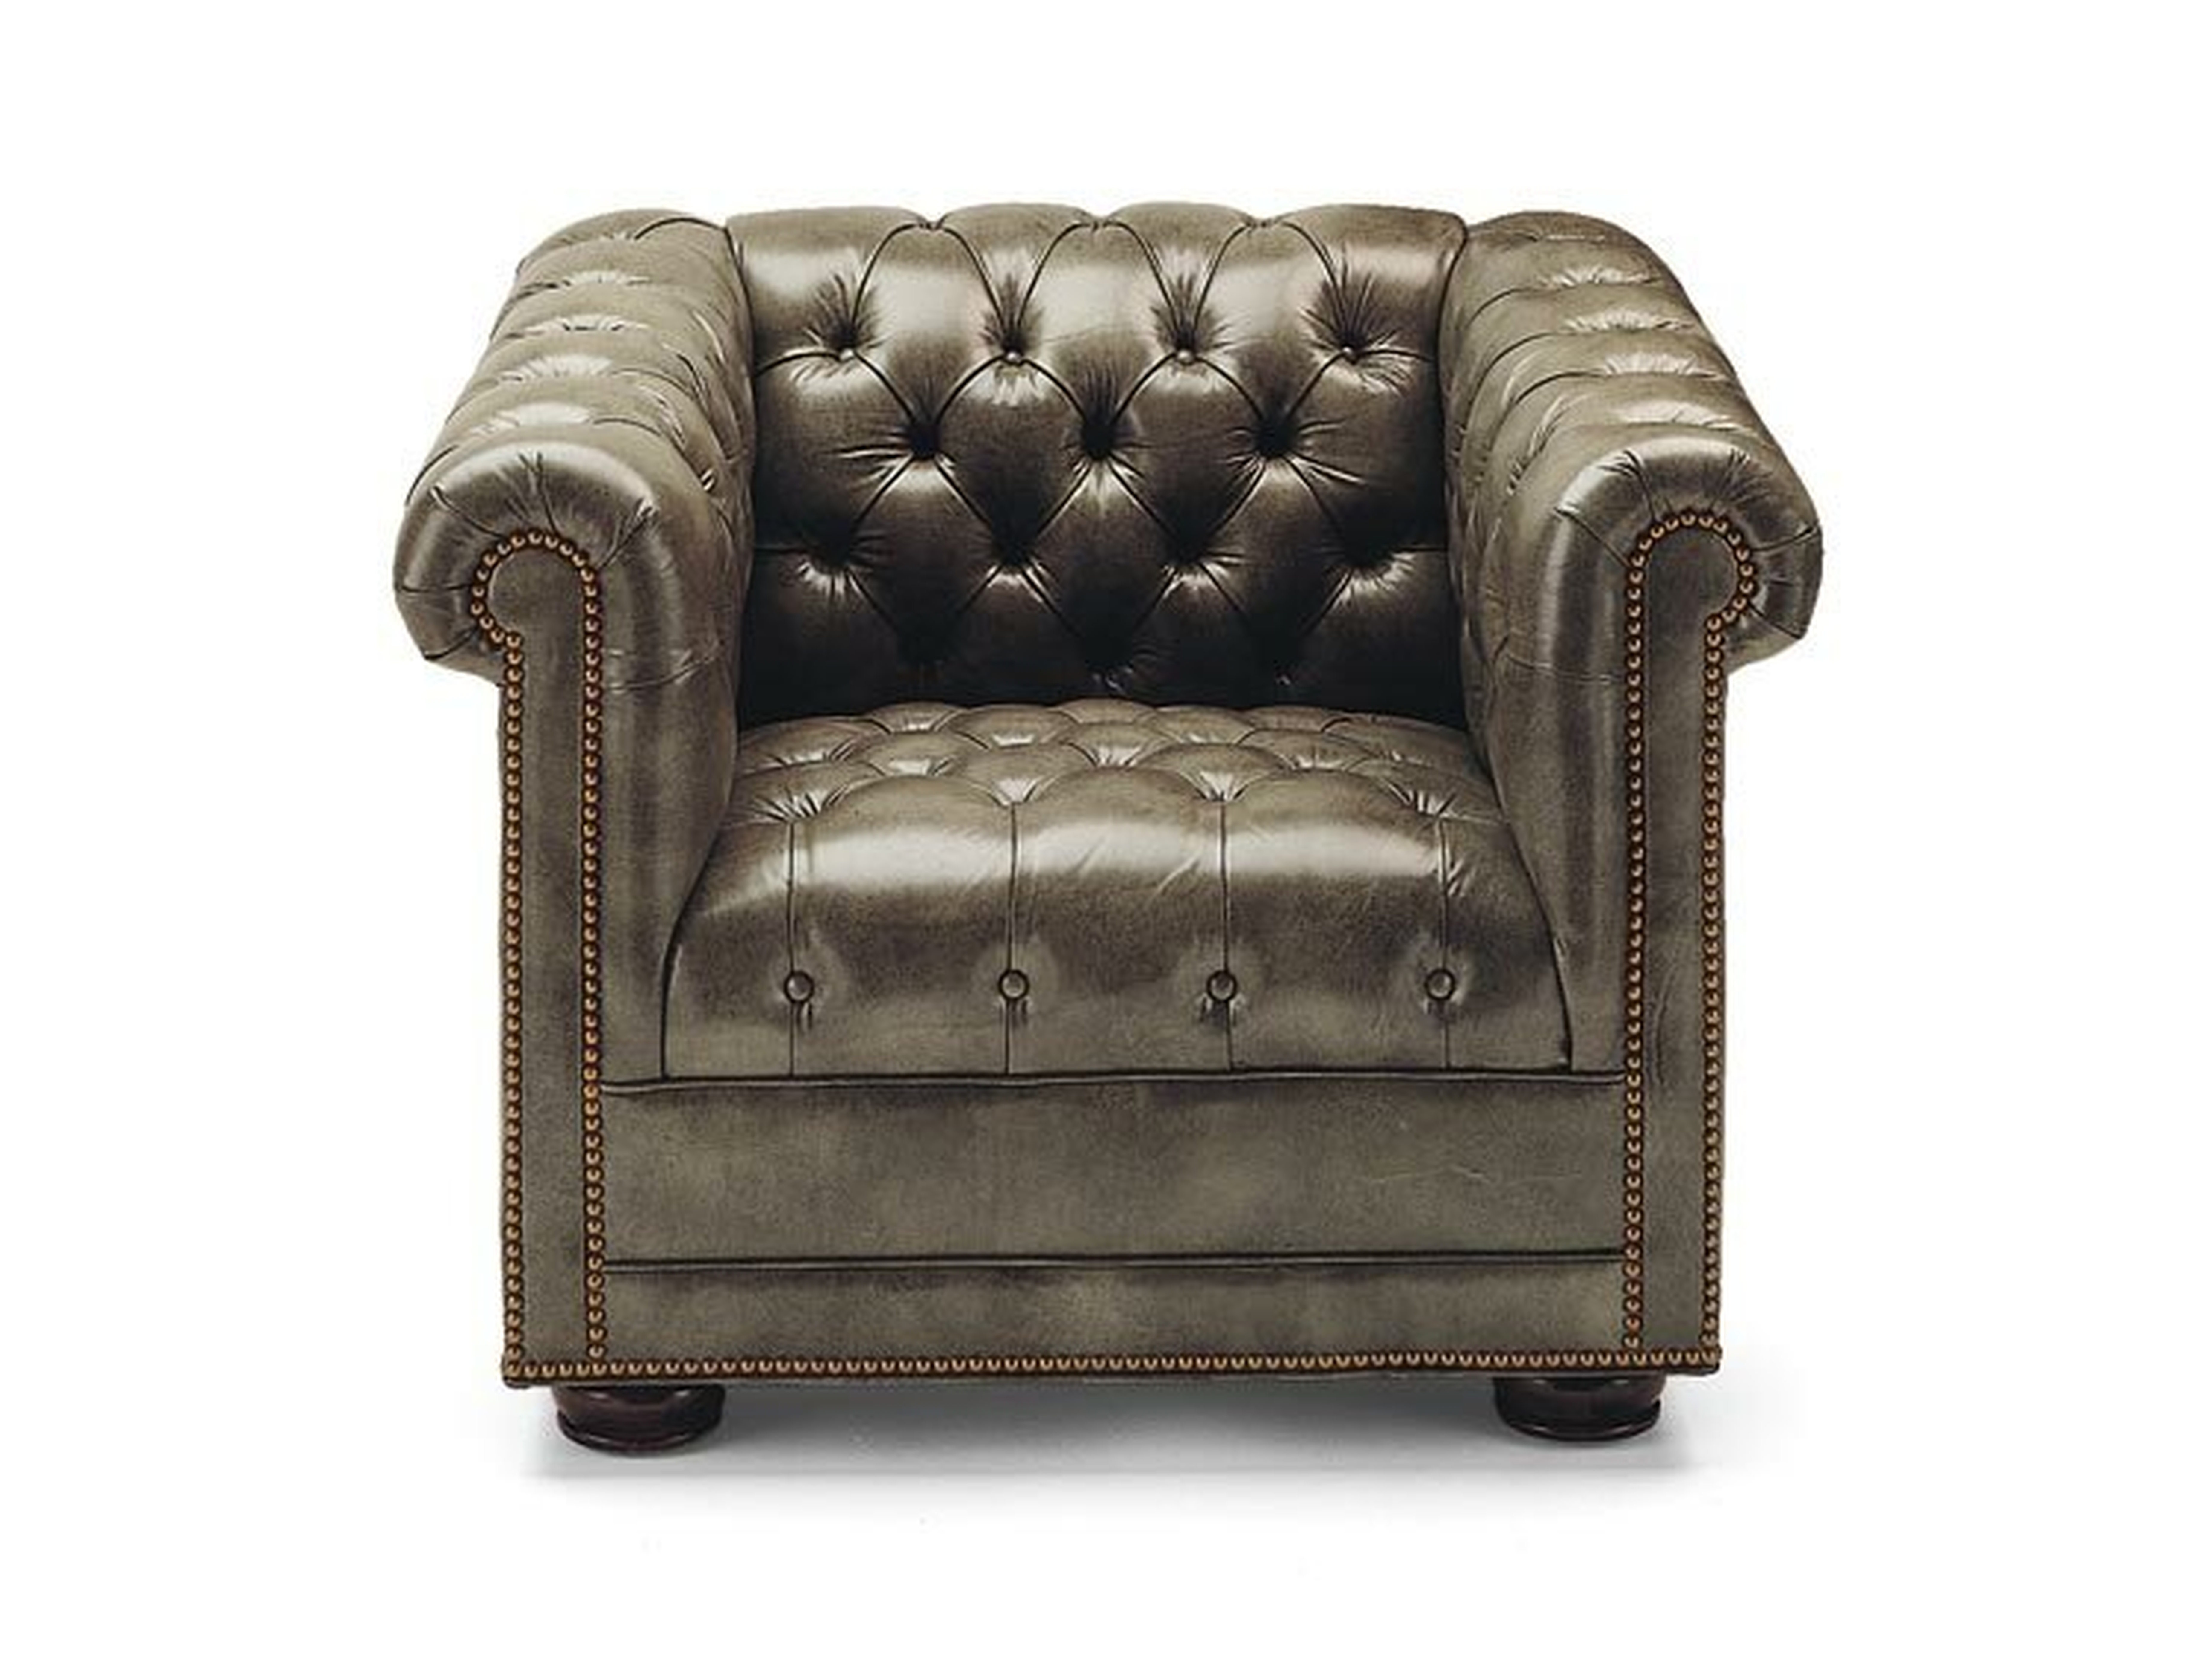 Leathercraft Churchill 38"" Wide Tufted Full Grain Leather Club Chair - Perigold